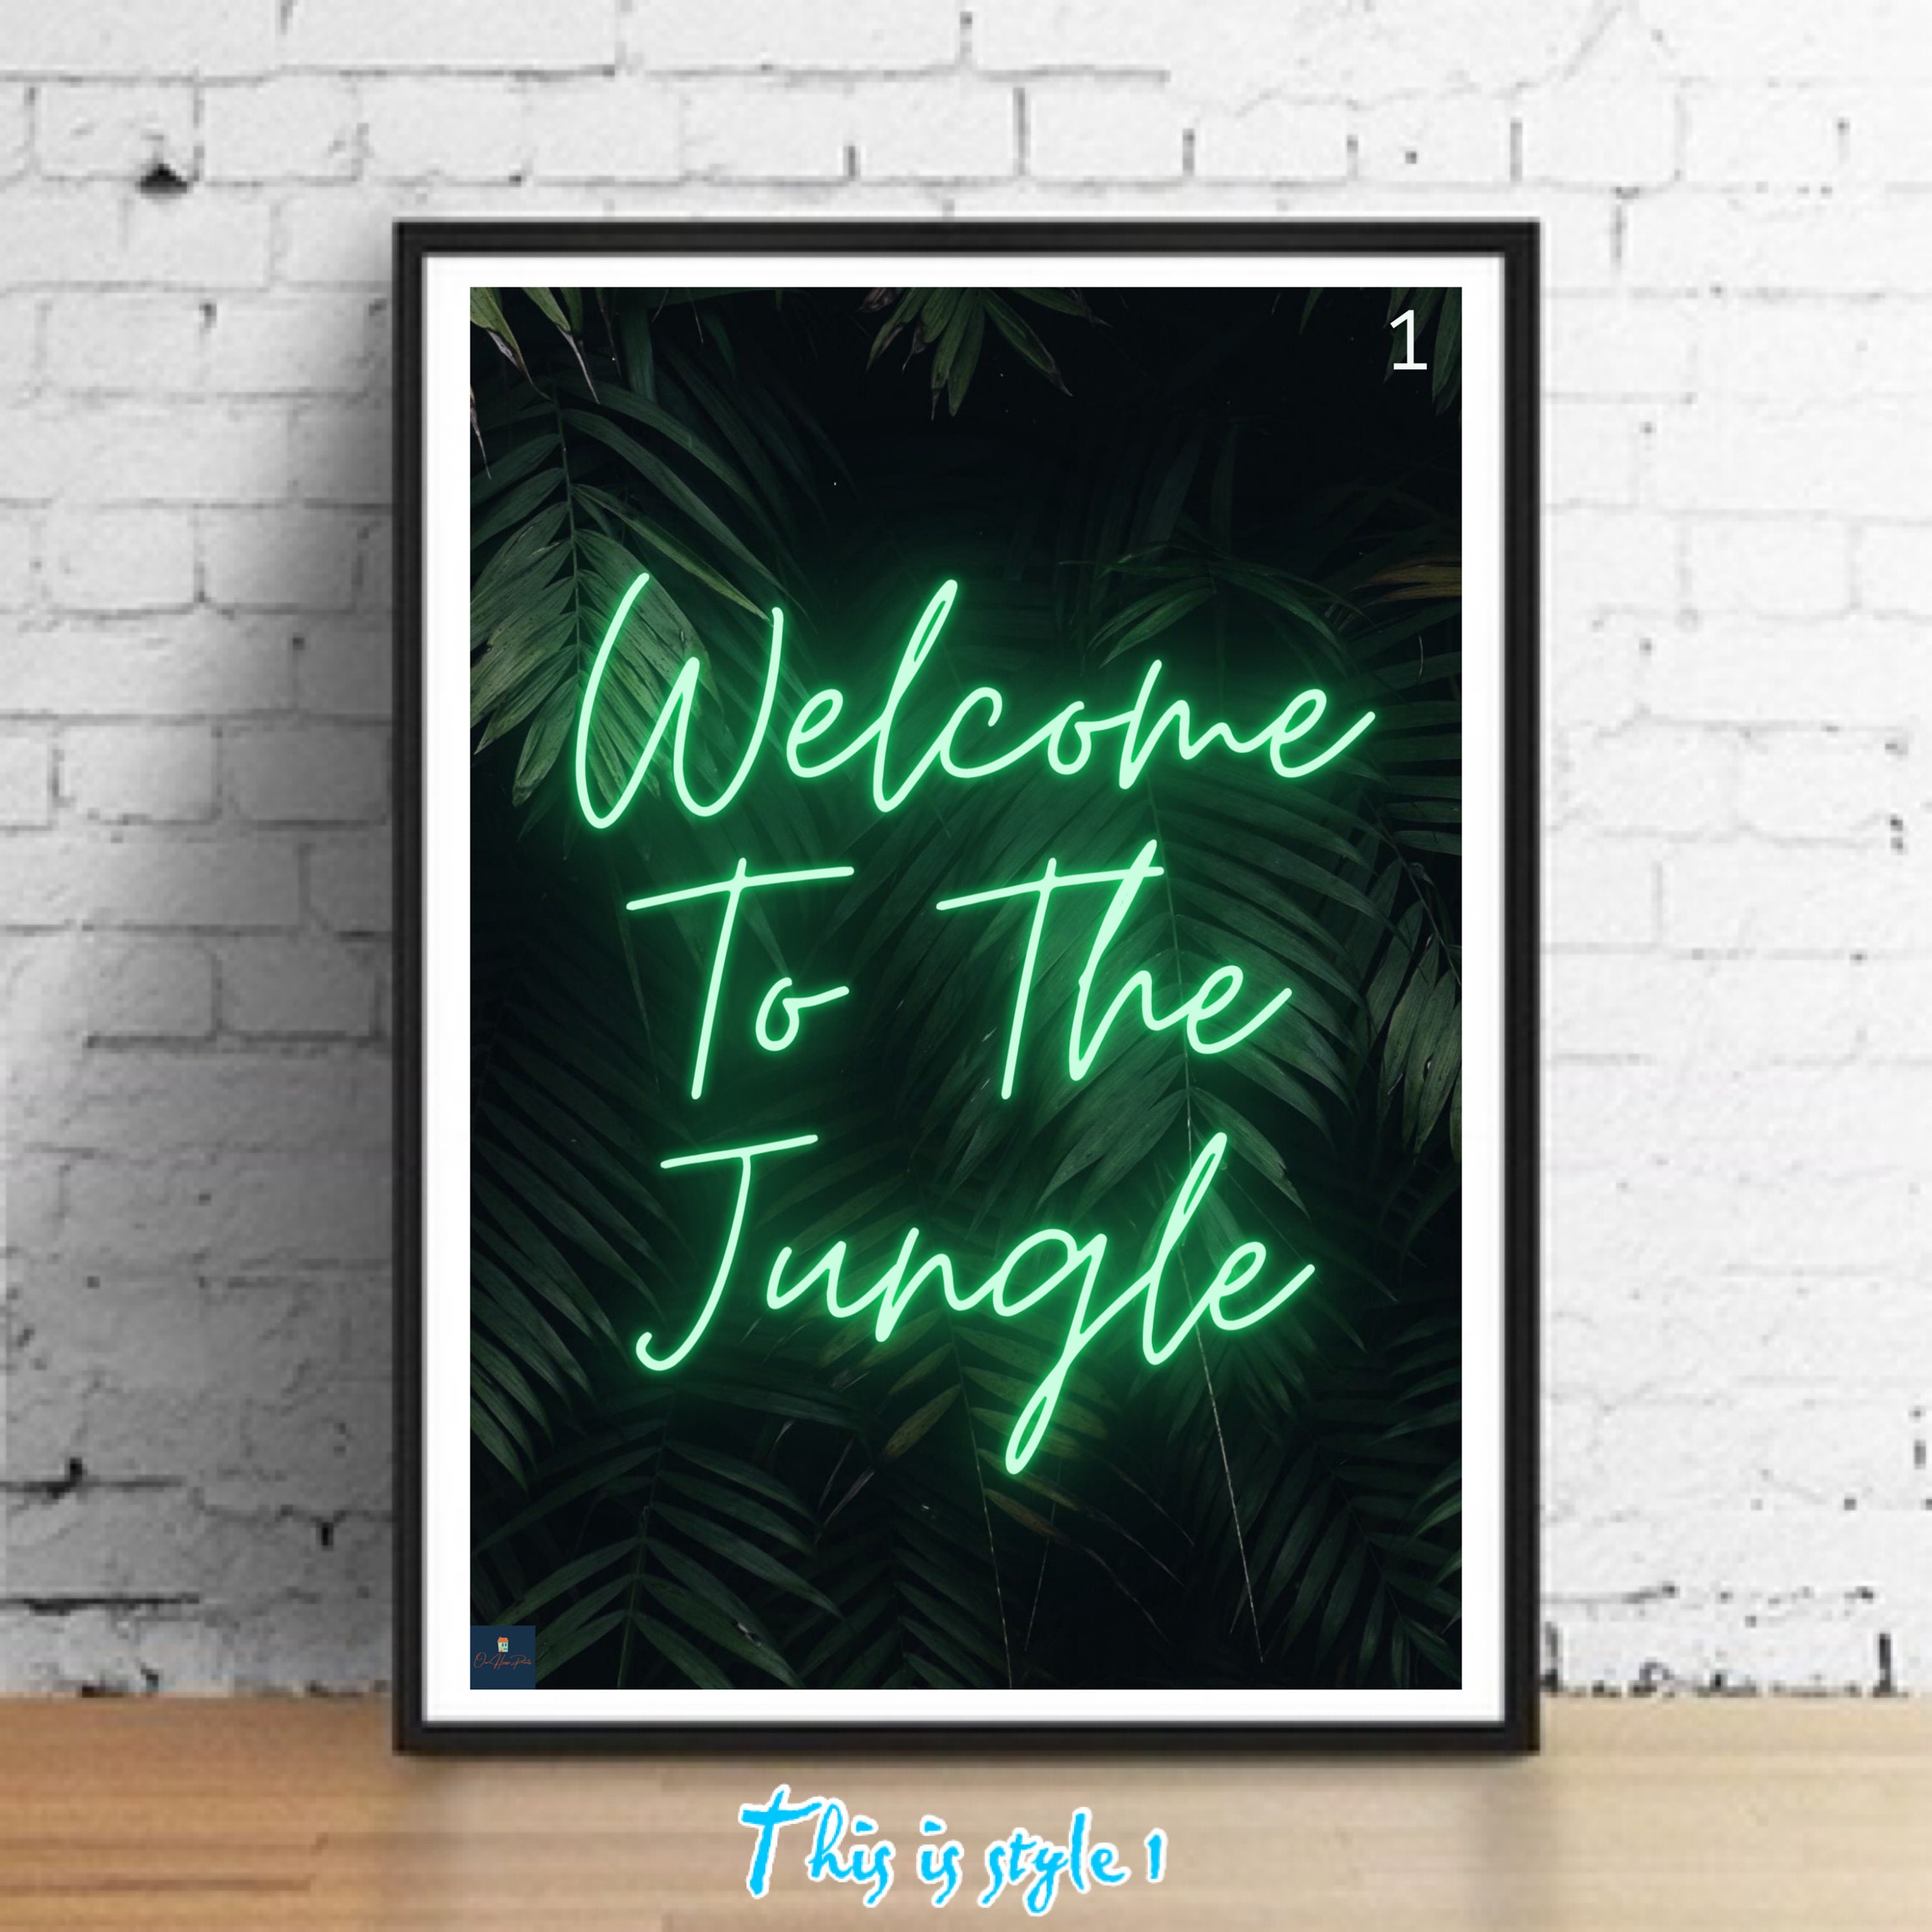 Rare-T Exclusive Limited Edition Gold 45 Guns N Roses - Welcome To The  Jungle Lyrics Custom Frame